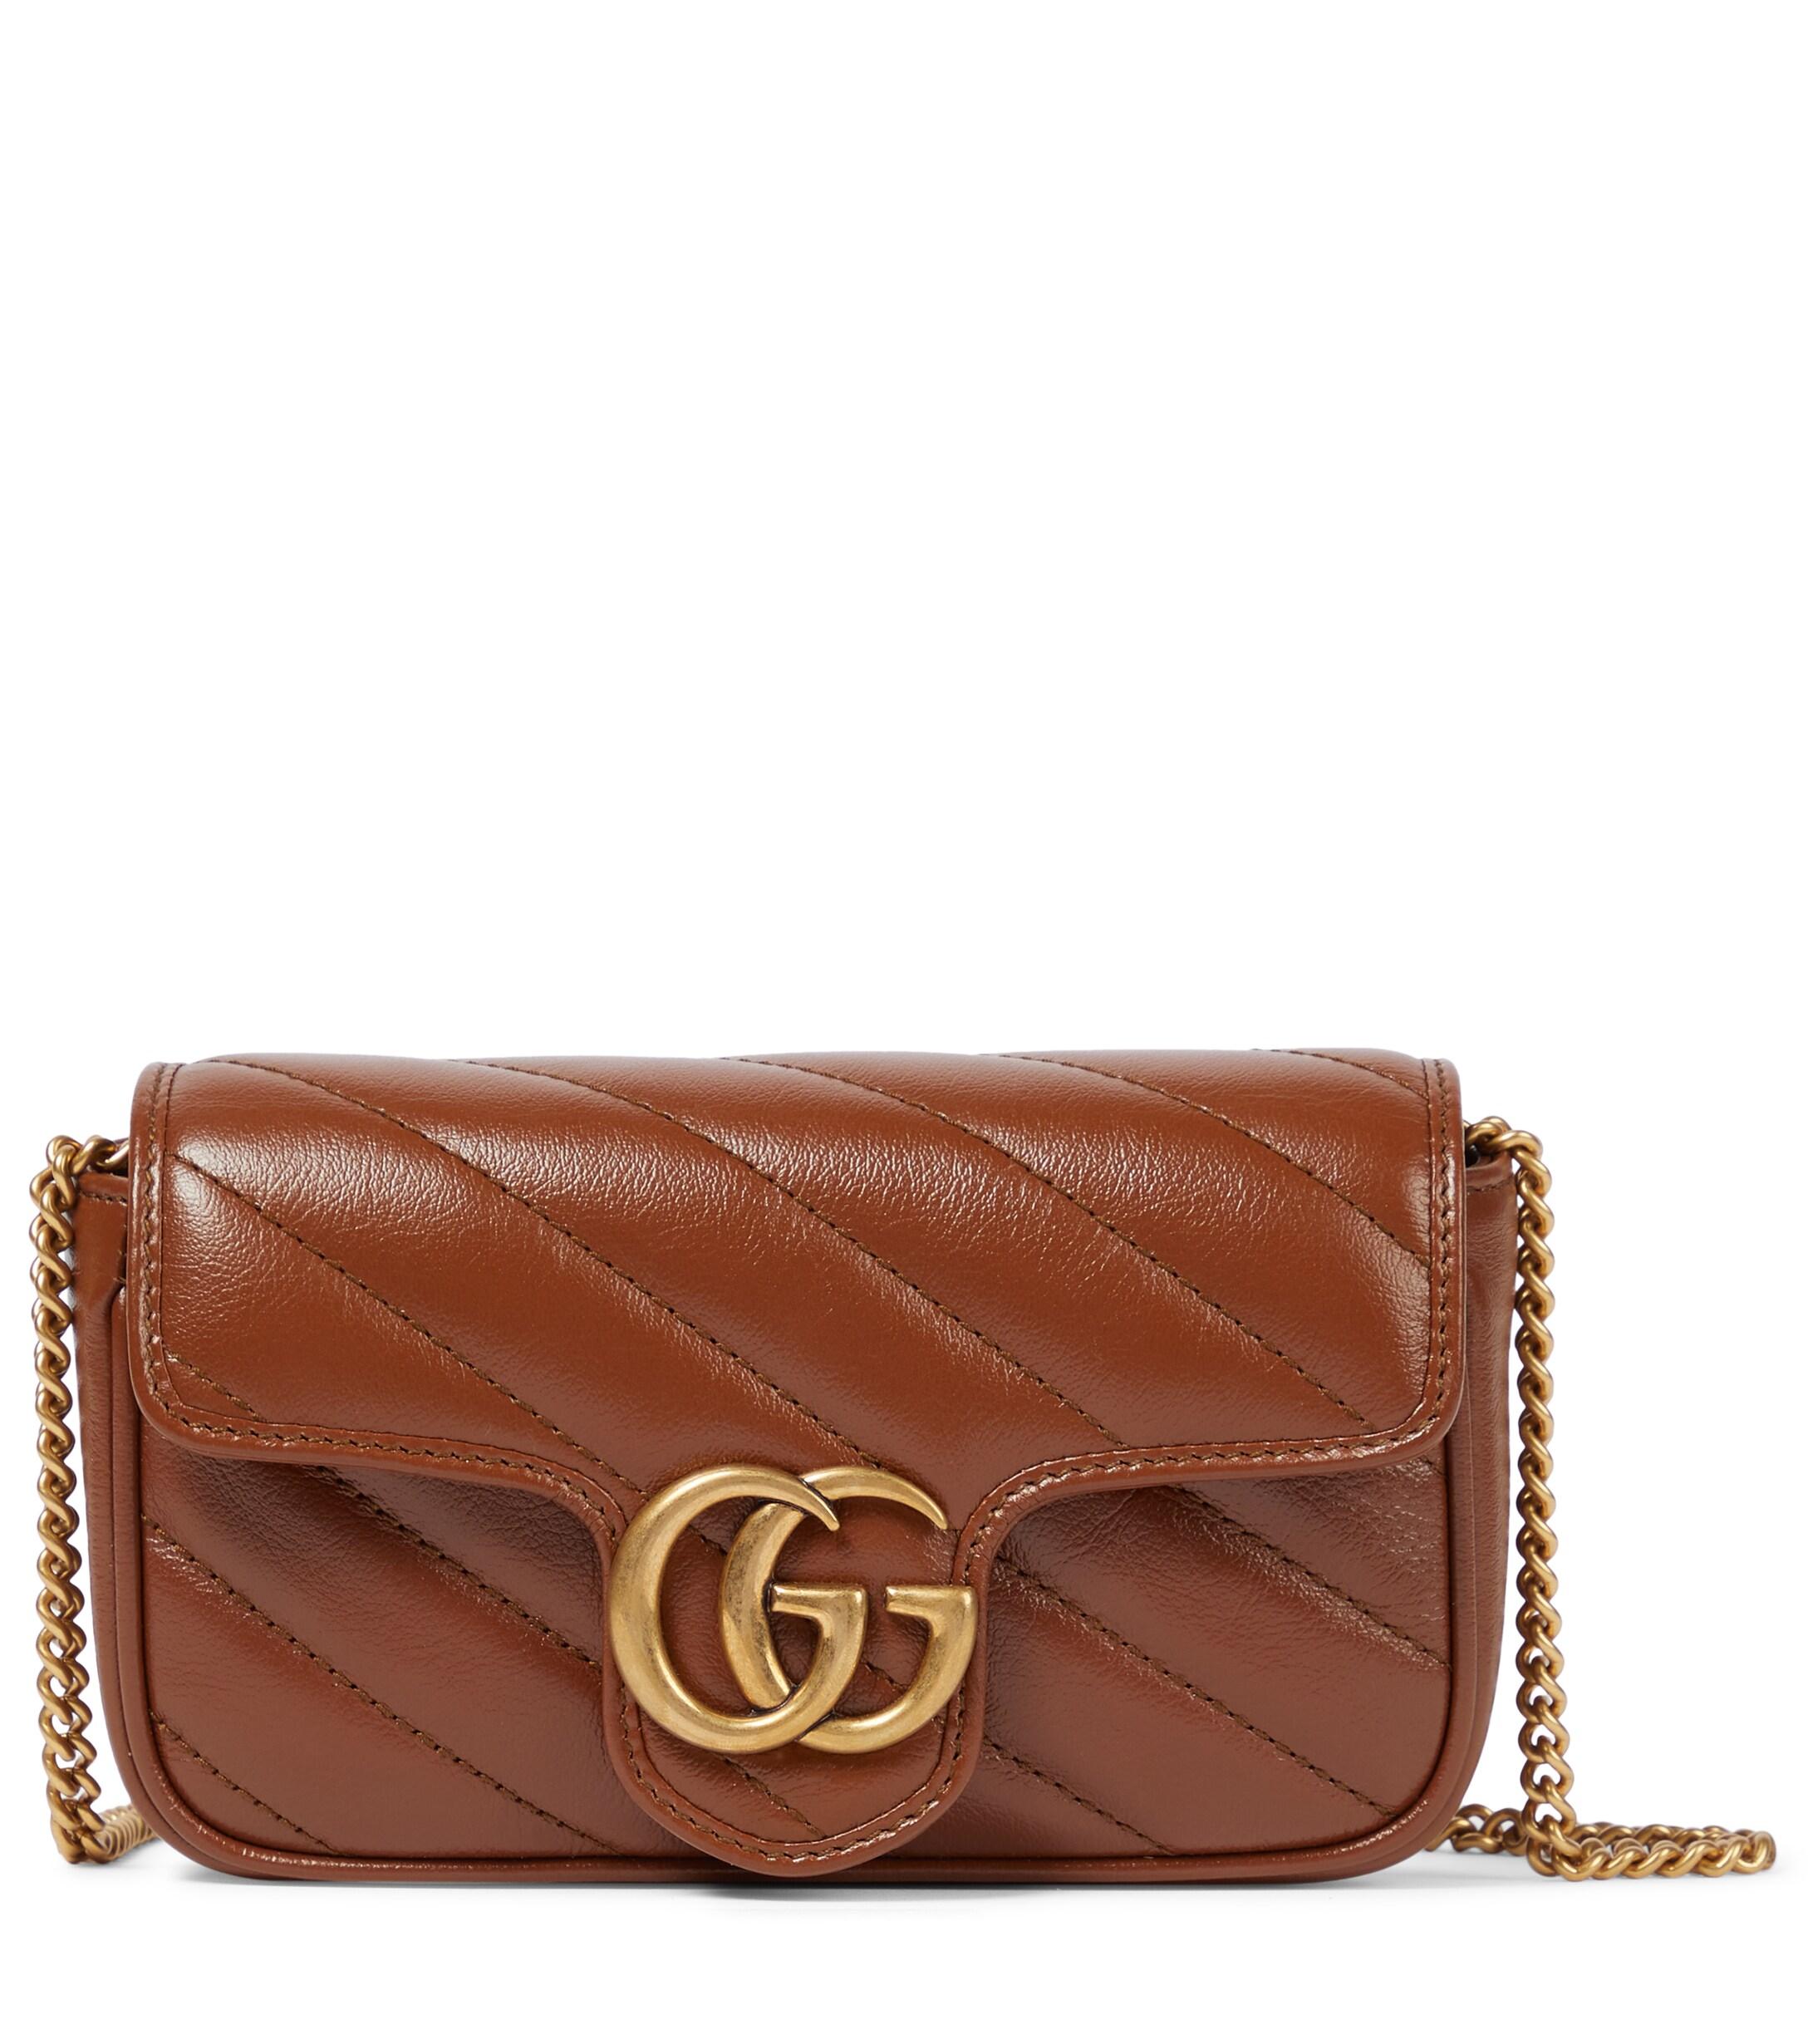 Gucci GG Marmont Super Mini Leather Shoulder Bag in Brown | Lyst UK